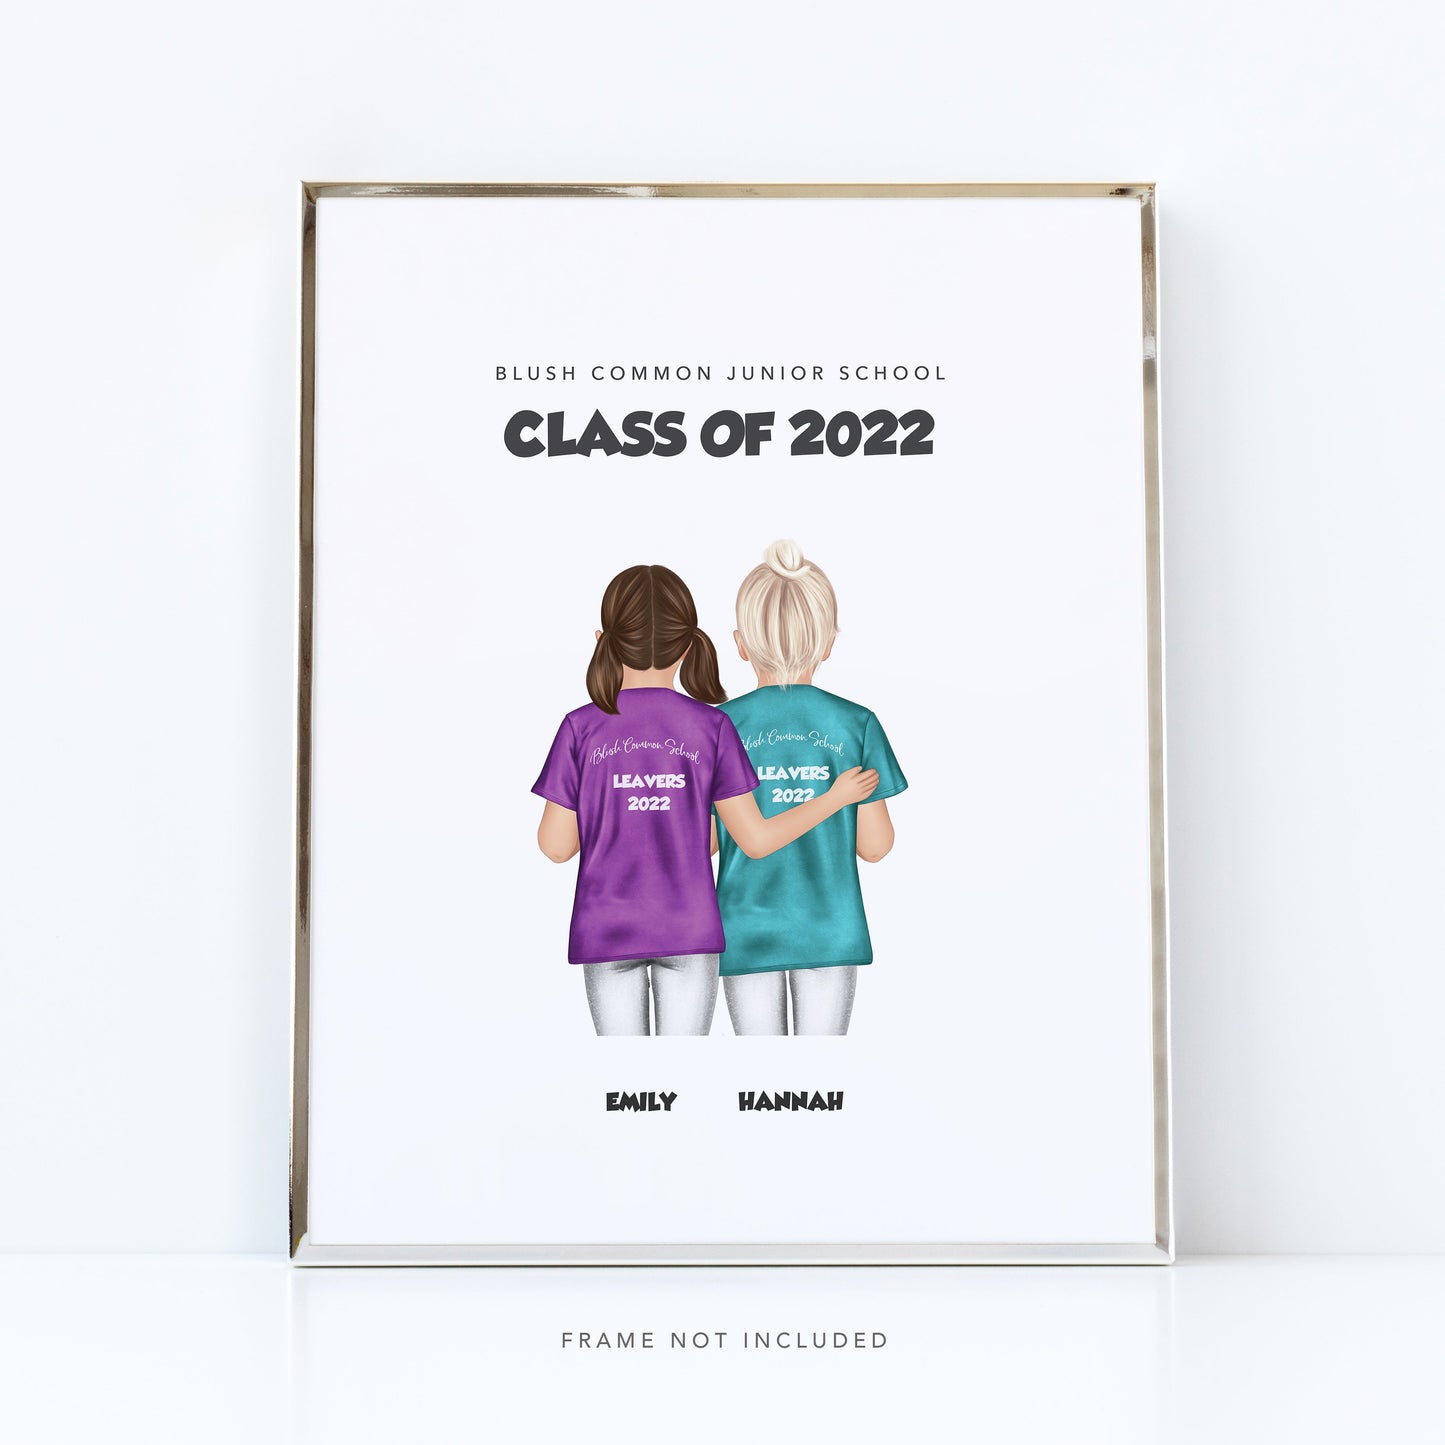 Class of 2022 goodbye gift for school leavers